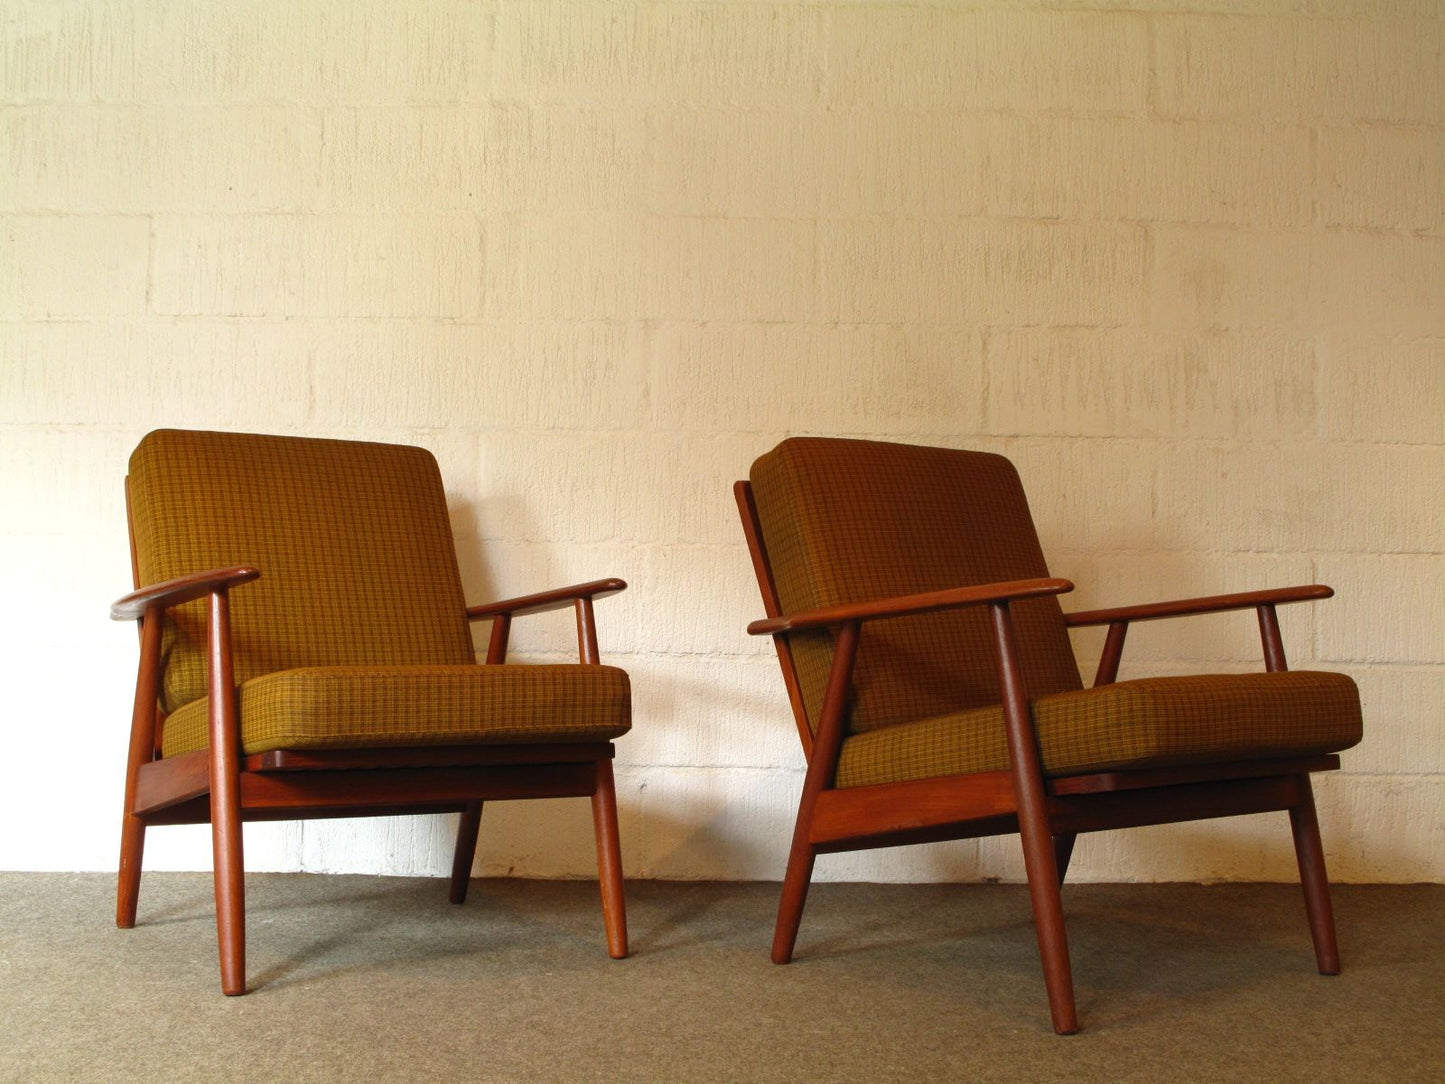 Pair of teak loungers with sprung cushions